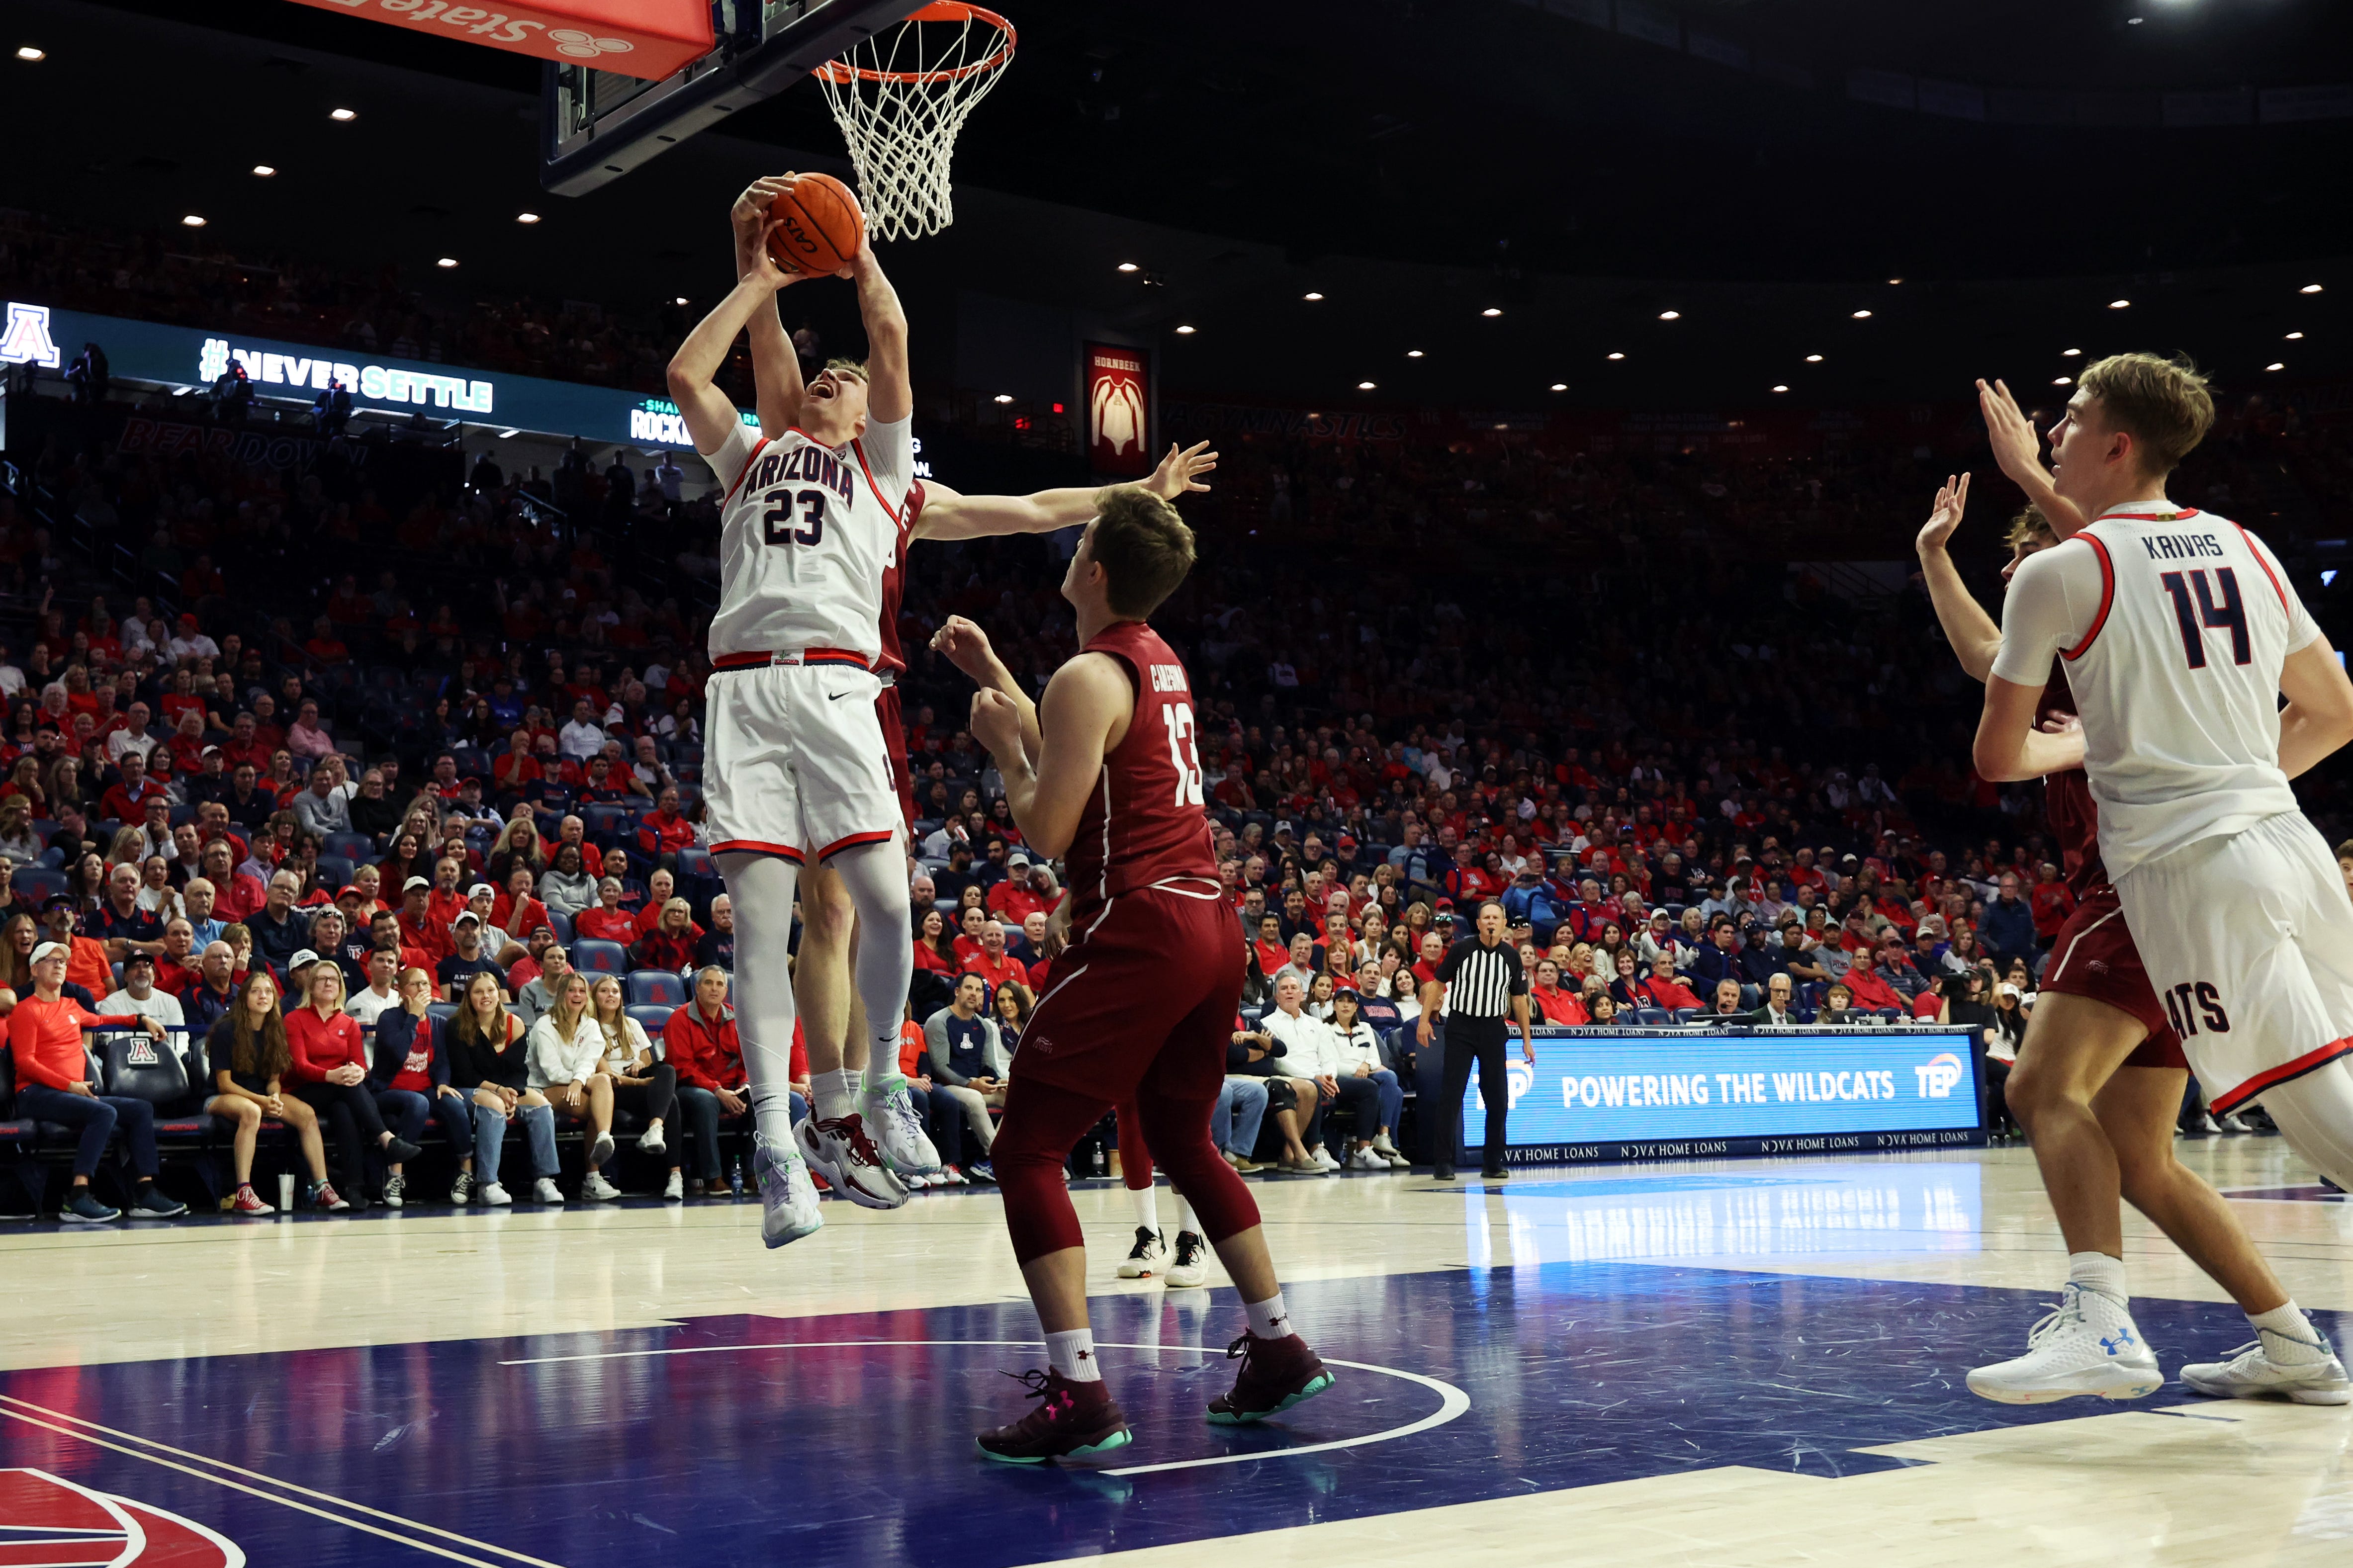 Arizona Claims No. 1 Seed in Men’s Tournament